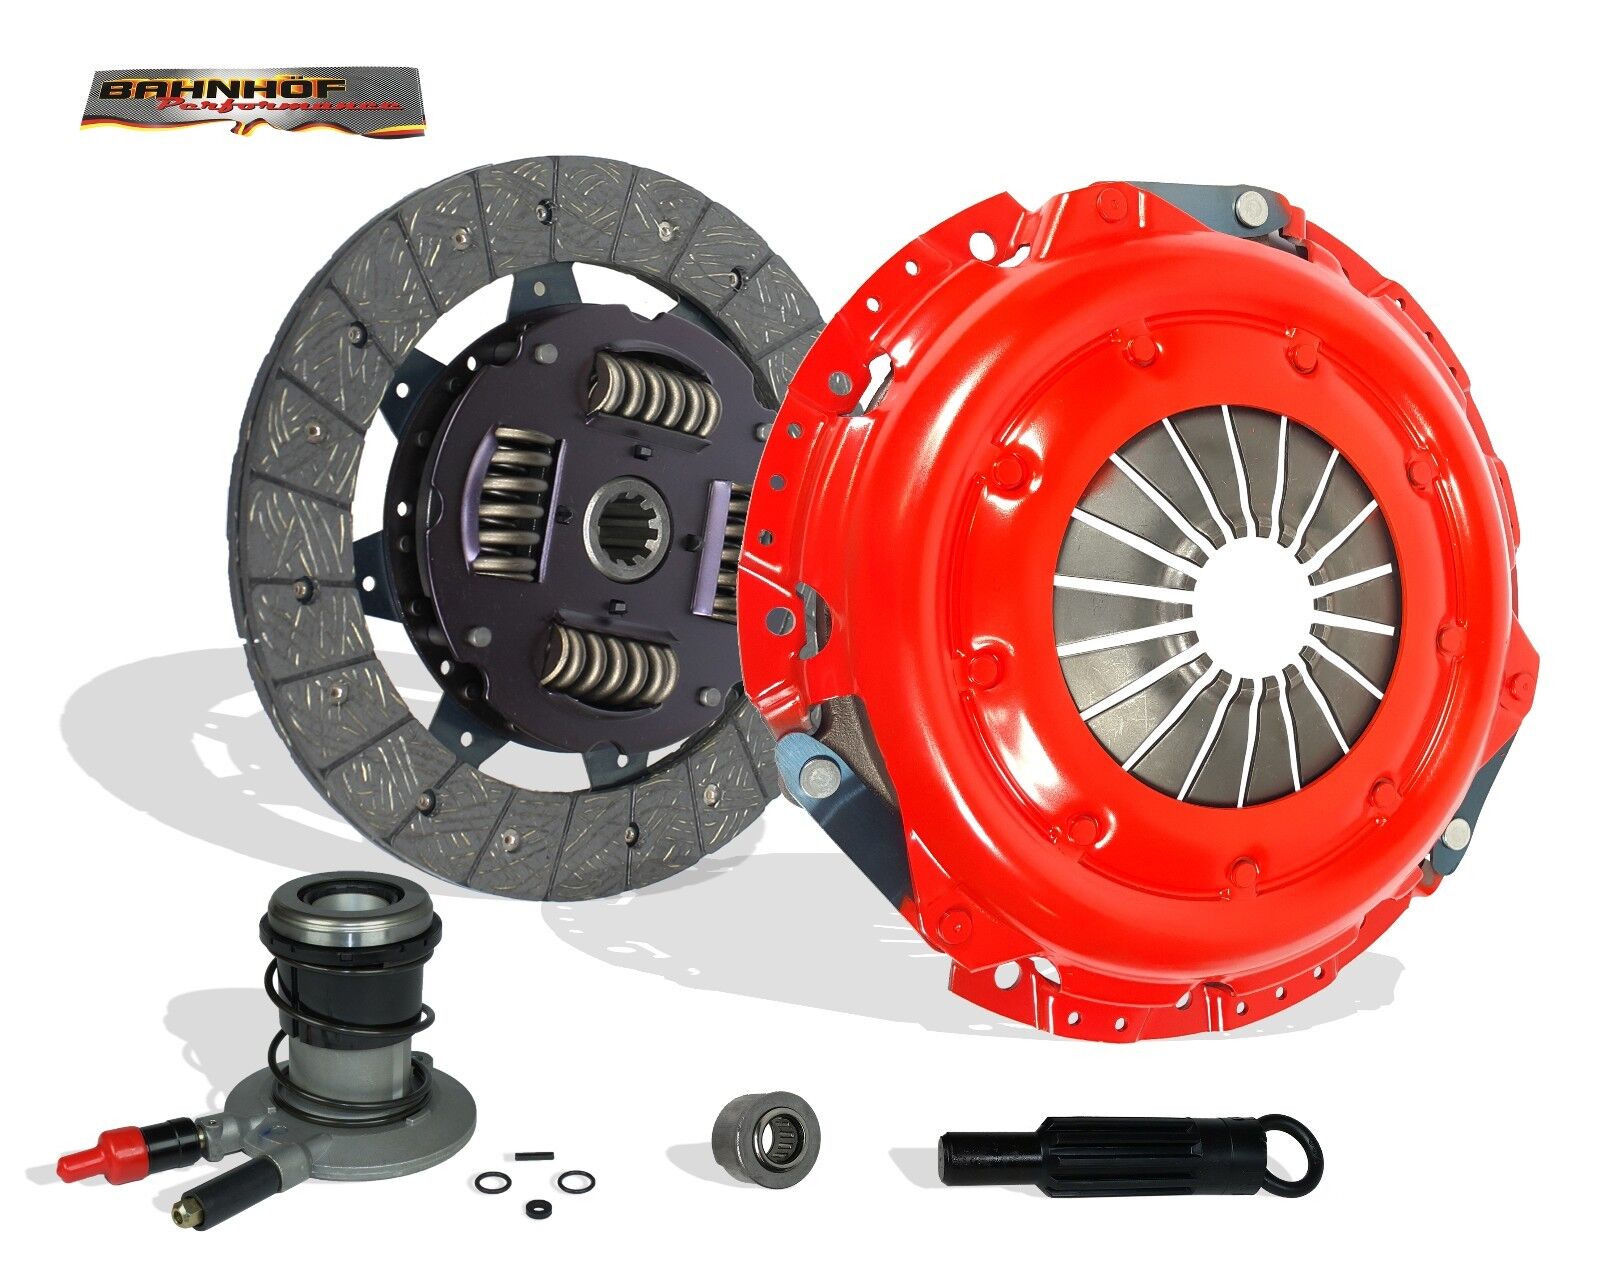 Bahnhof Stage 1 Clutch Kit Slave fits 89-93 Ford Thunderbird 3.8L Supercharged